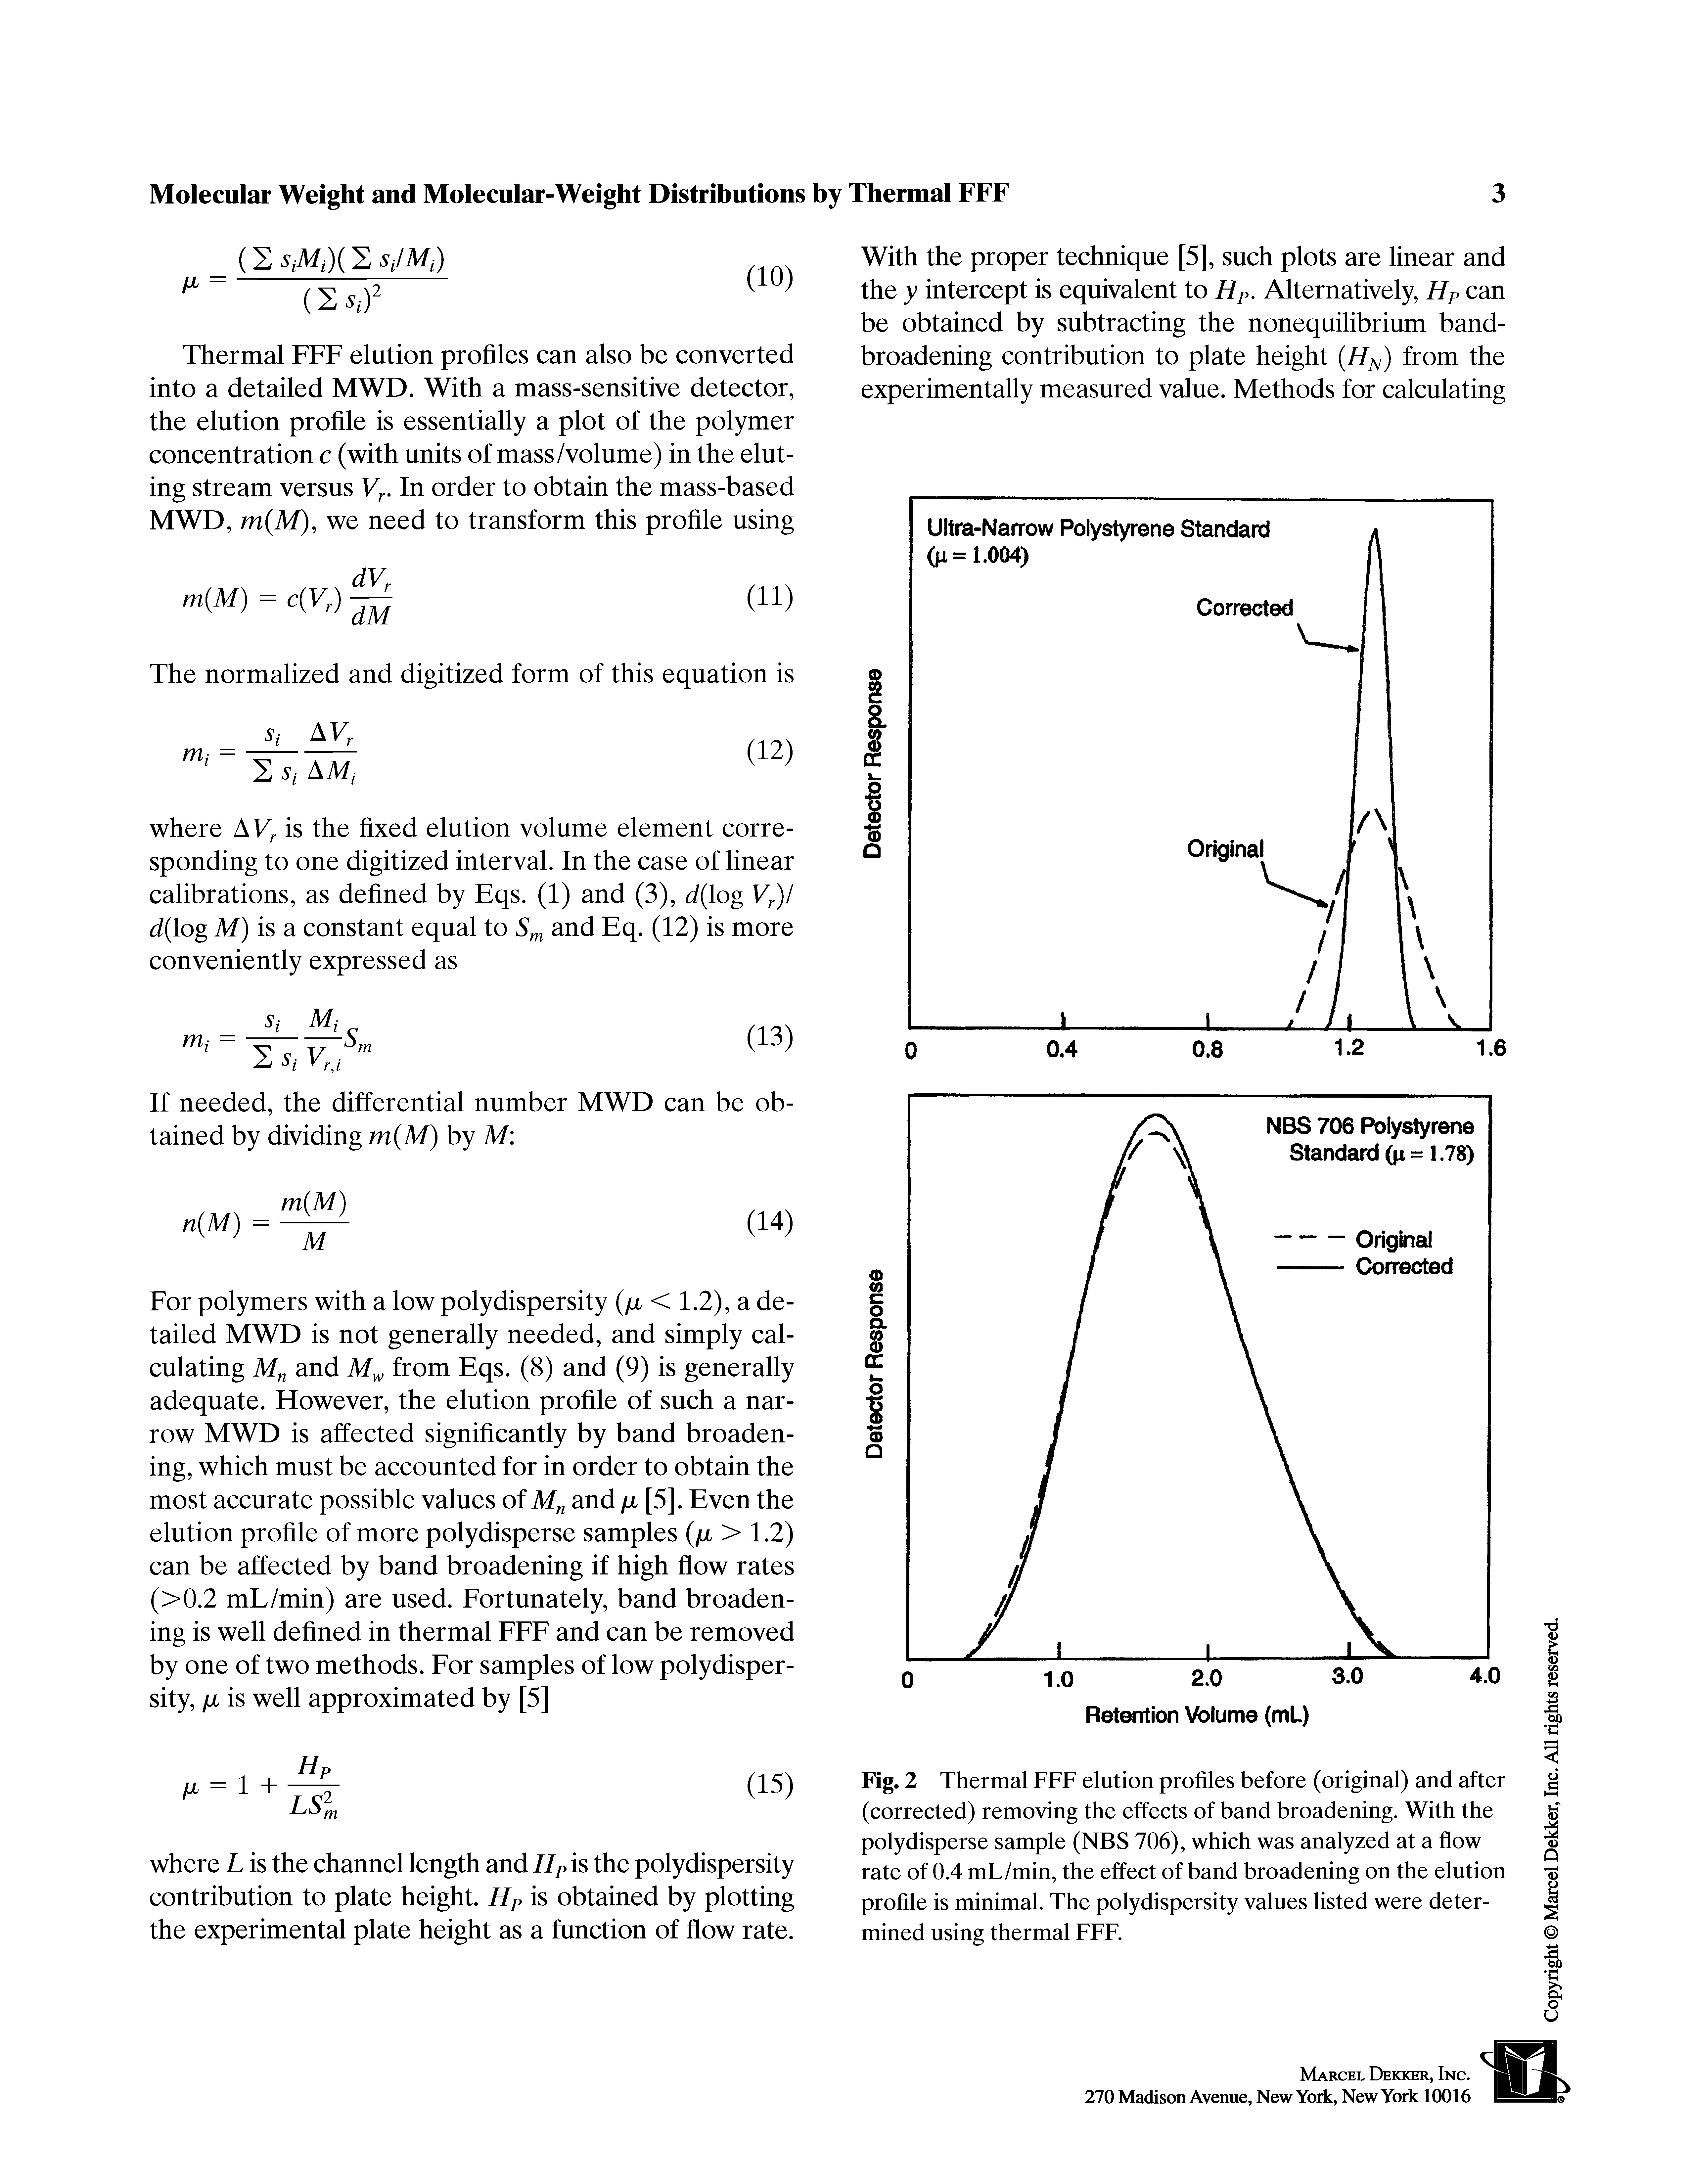 Fig. 2 Thermal FFF elution profiles before (original) and after (corrected) removing the effects of band broadening. With the poly disperse sample (NBS 706), which was analyzed at a flow rate of 0.4 mL/min, the effect of band broadening on the elution profile is minimal. The polydispersity values listed were determined using thermal FFF.